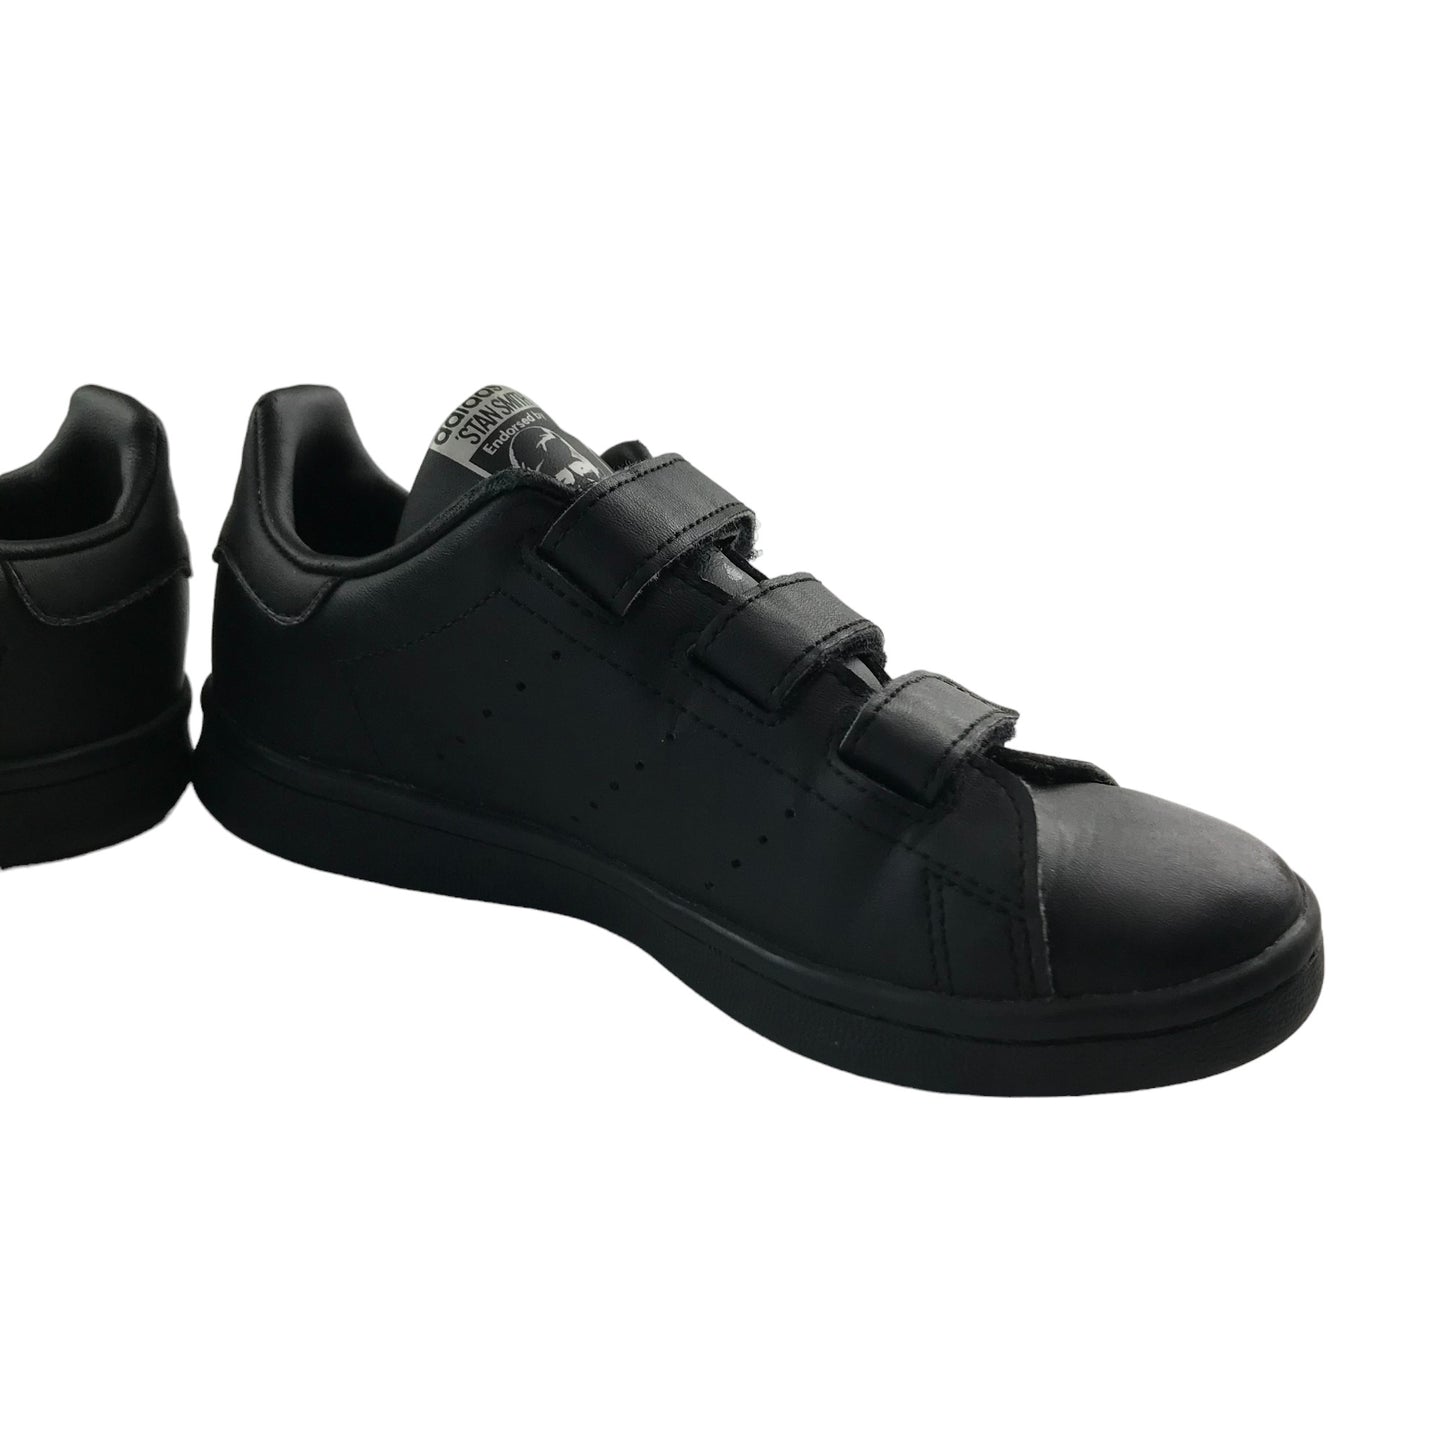 Adidas Stan Smith Trainers Shoe Size 13K Junior Black with Straps